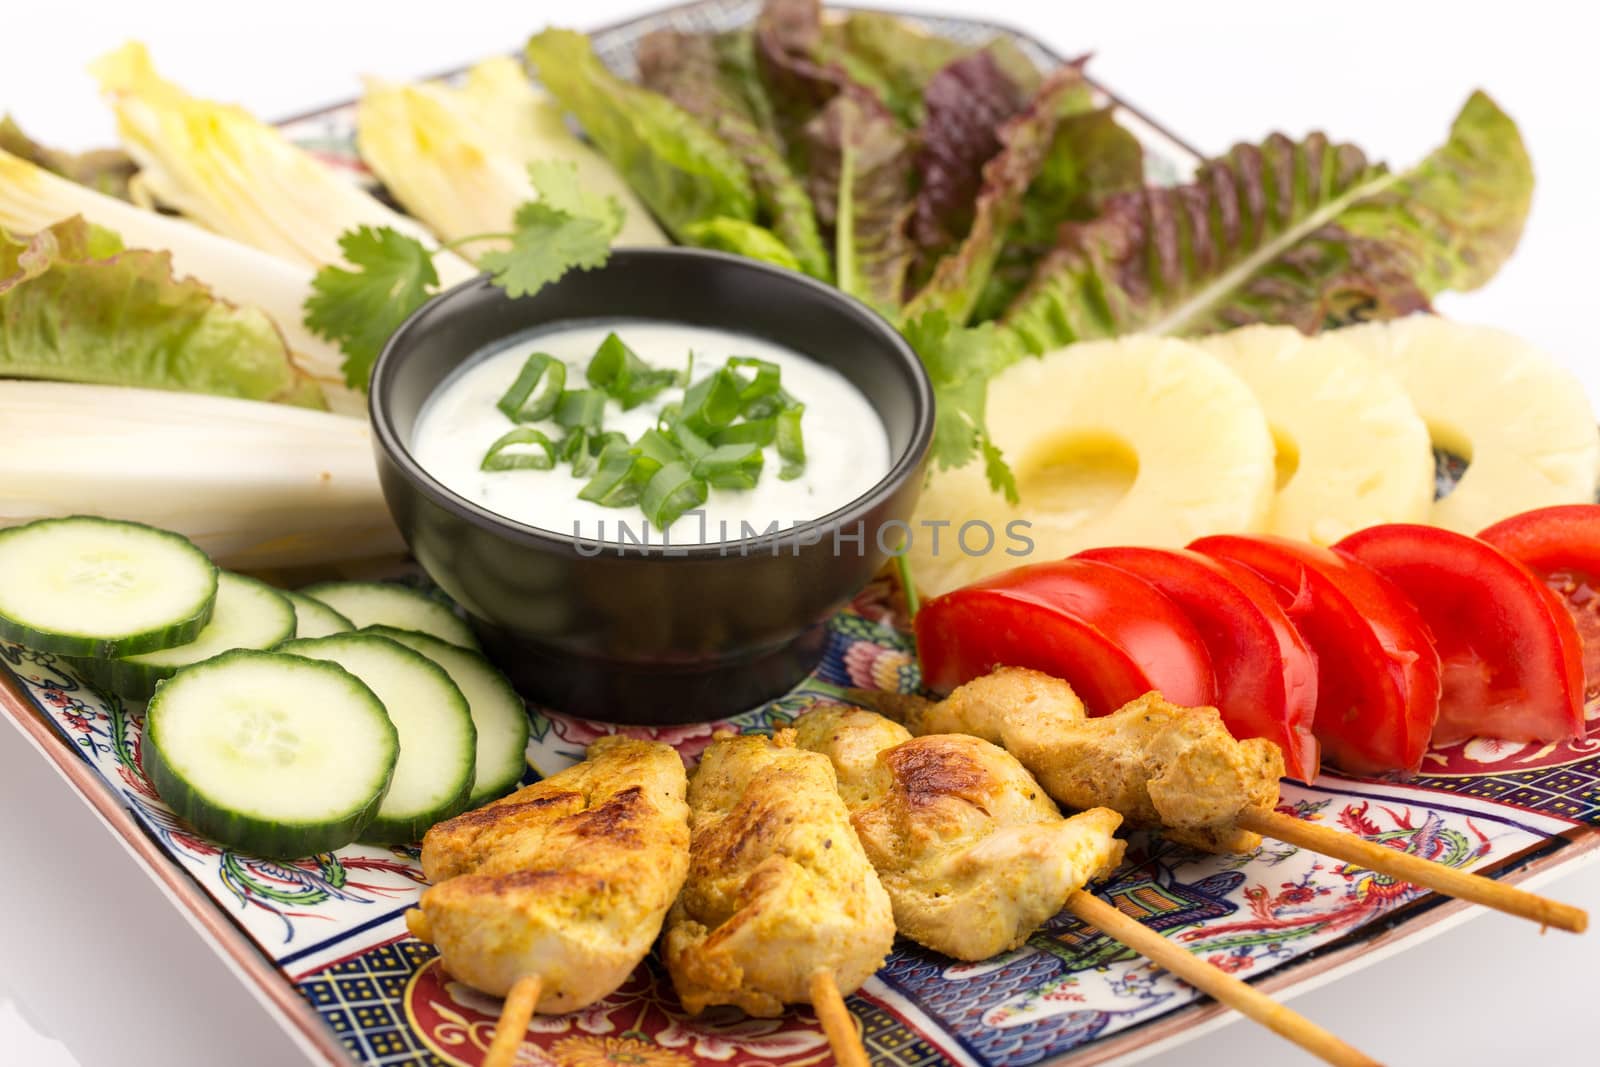 Asian food with chicken skewers, sauce, tomatoes, cucumber, pineapples, endives and salad.